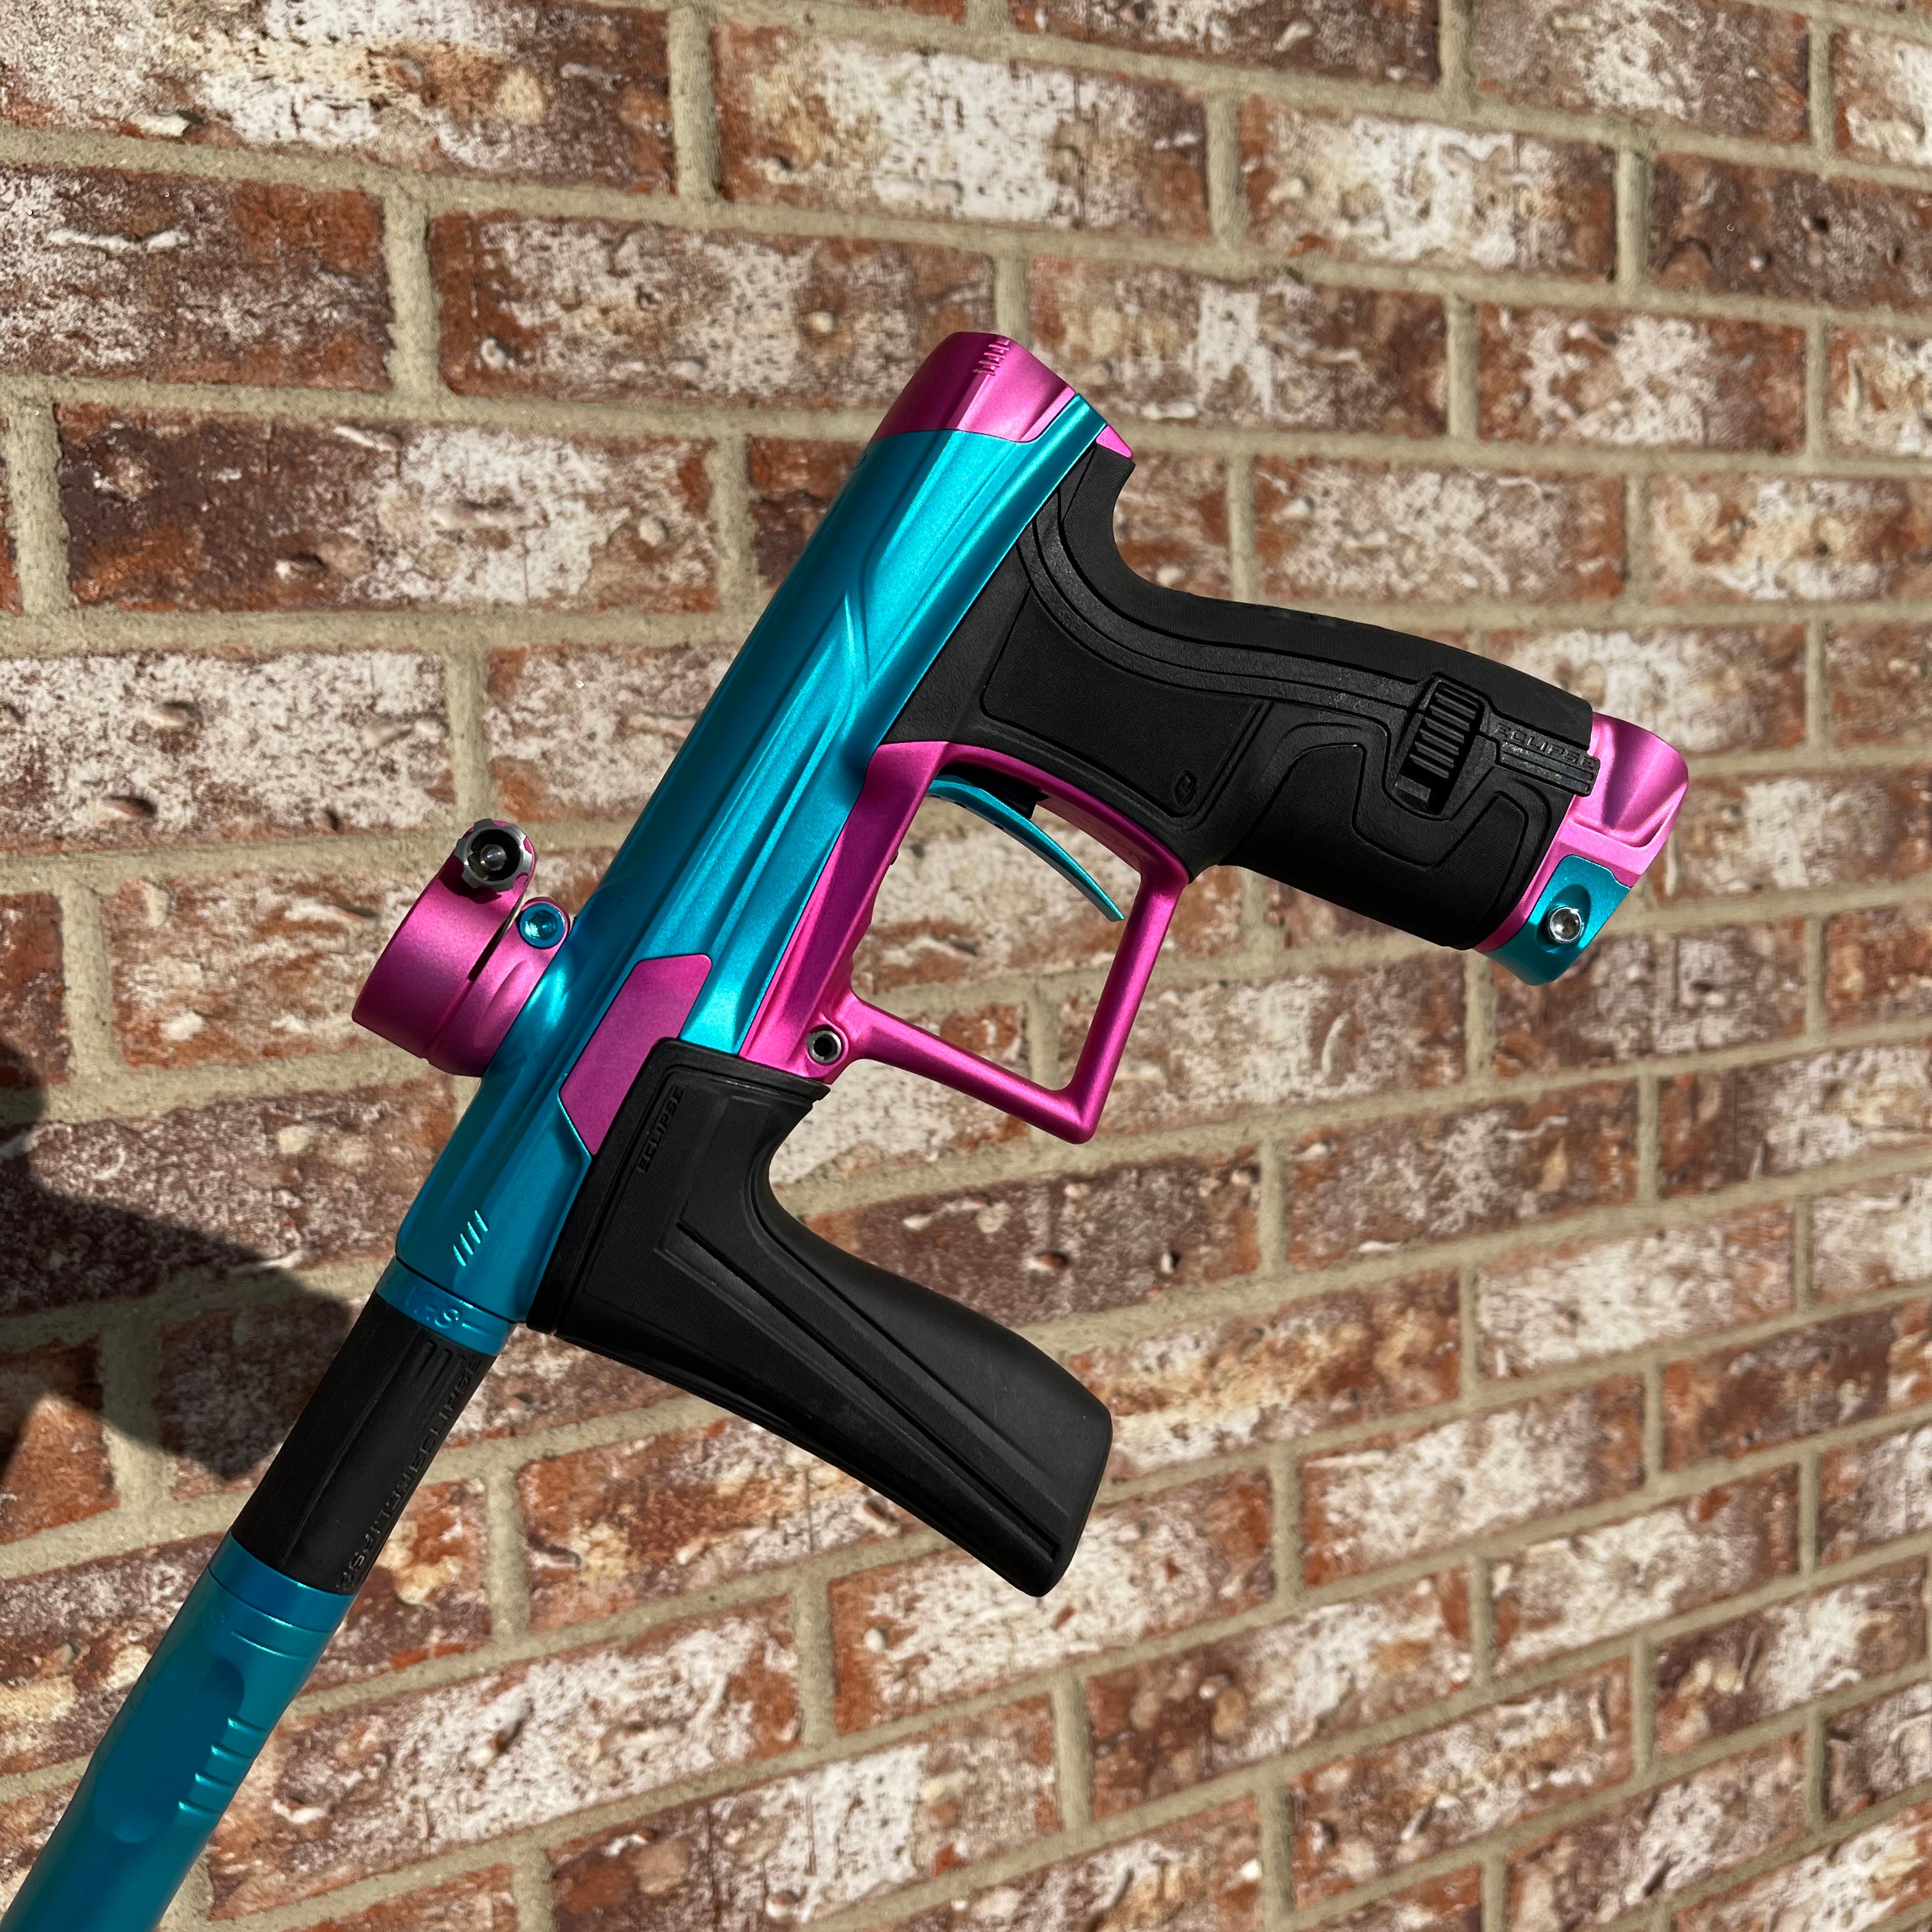 Used Planet Eclipse Geo 4 Paintball Gun - Teal/Pink